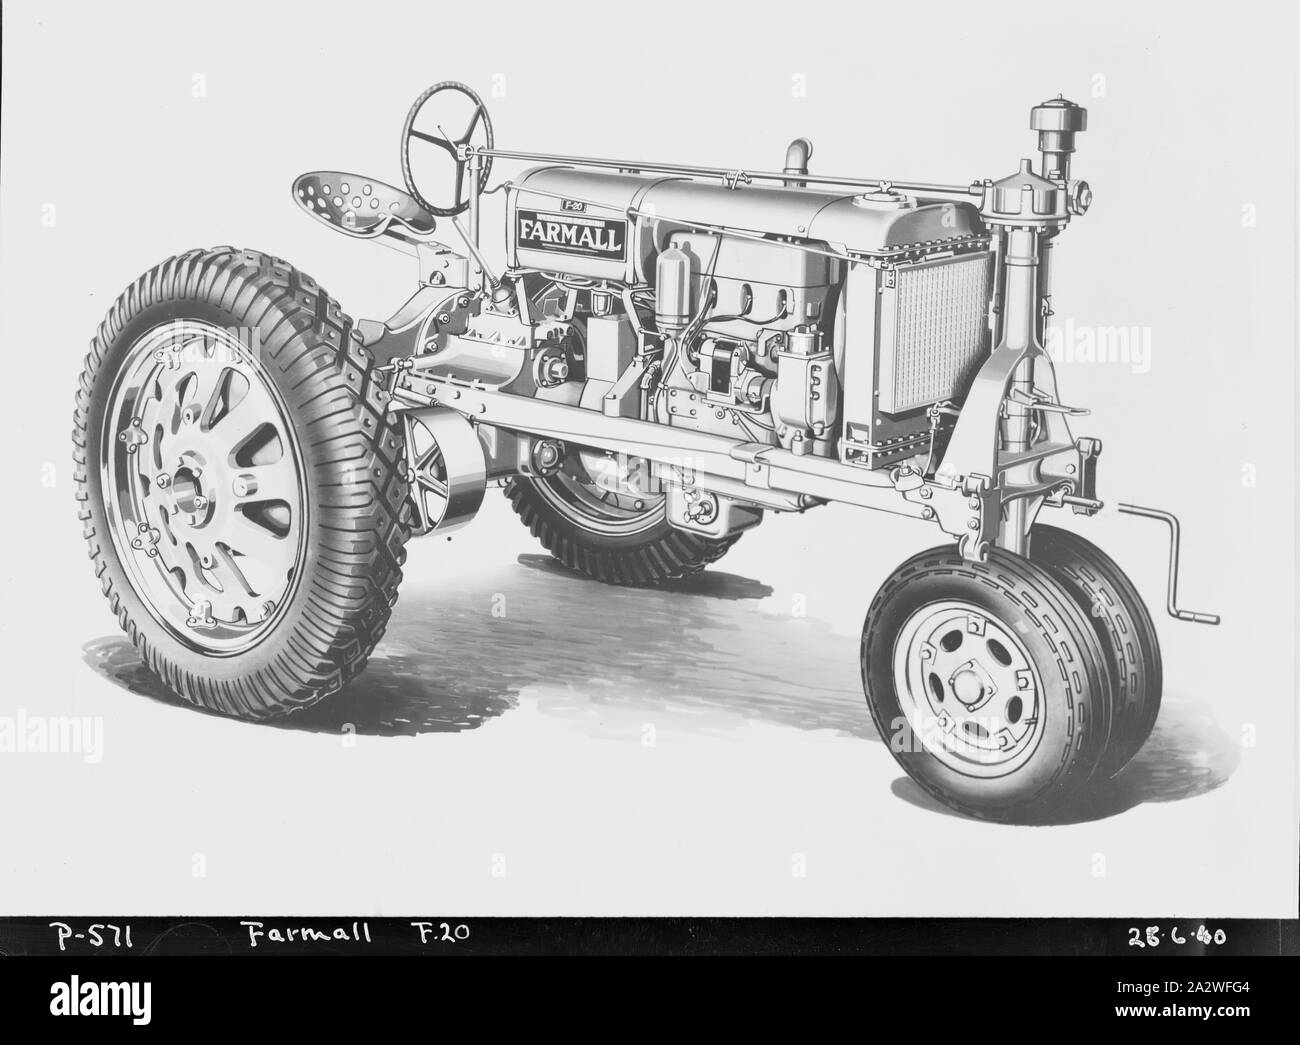 Negative - International Harvester, Farmall F-20 Tractor (Rubber Tyres), 1940, Part of a large collection of glass plate and film negatives, transparencies, photo albums, product catalogues, videos, motion picture films, company journals, advertisements and newspaper cuttings relating to the operations of the International Harvester Company and its subsidiaries in Australia. The International Harvester Company of America was formed in 1902 by the merger of five leading Stock Photo